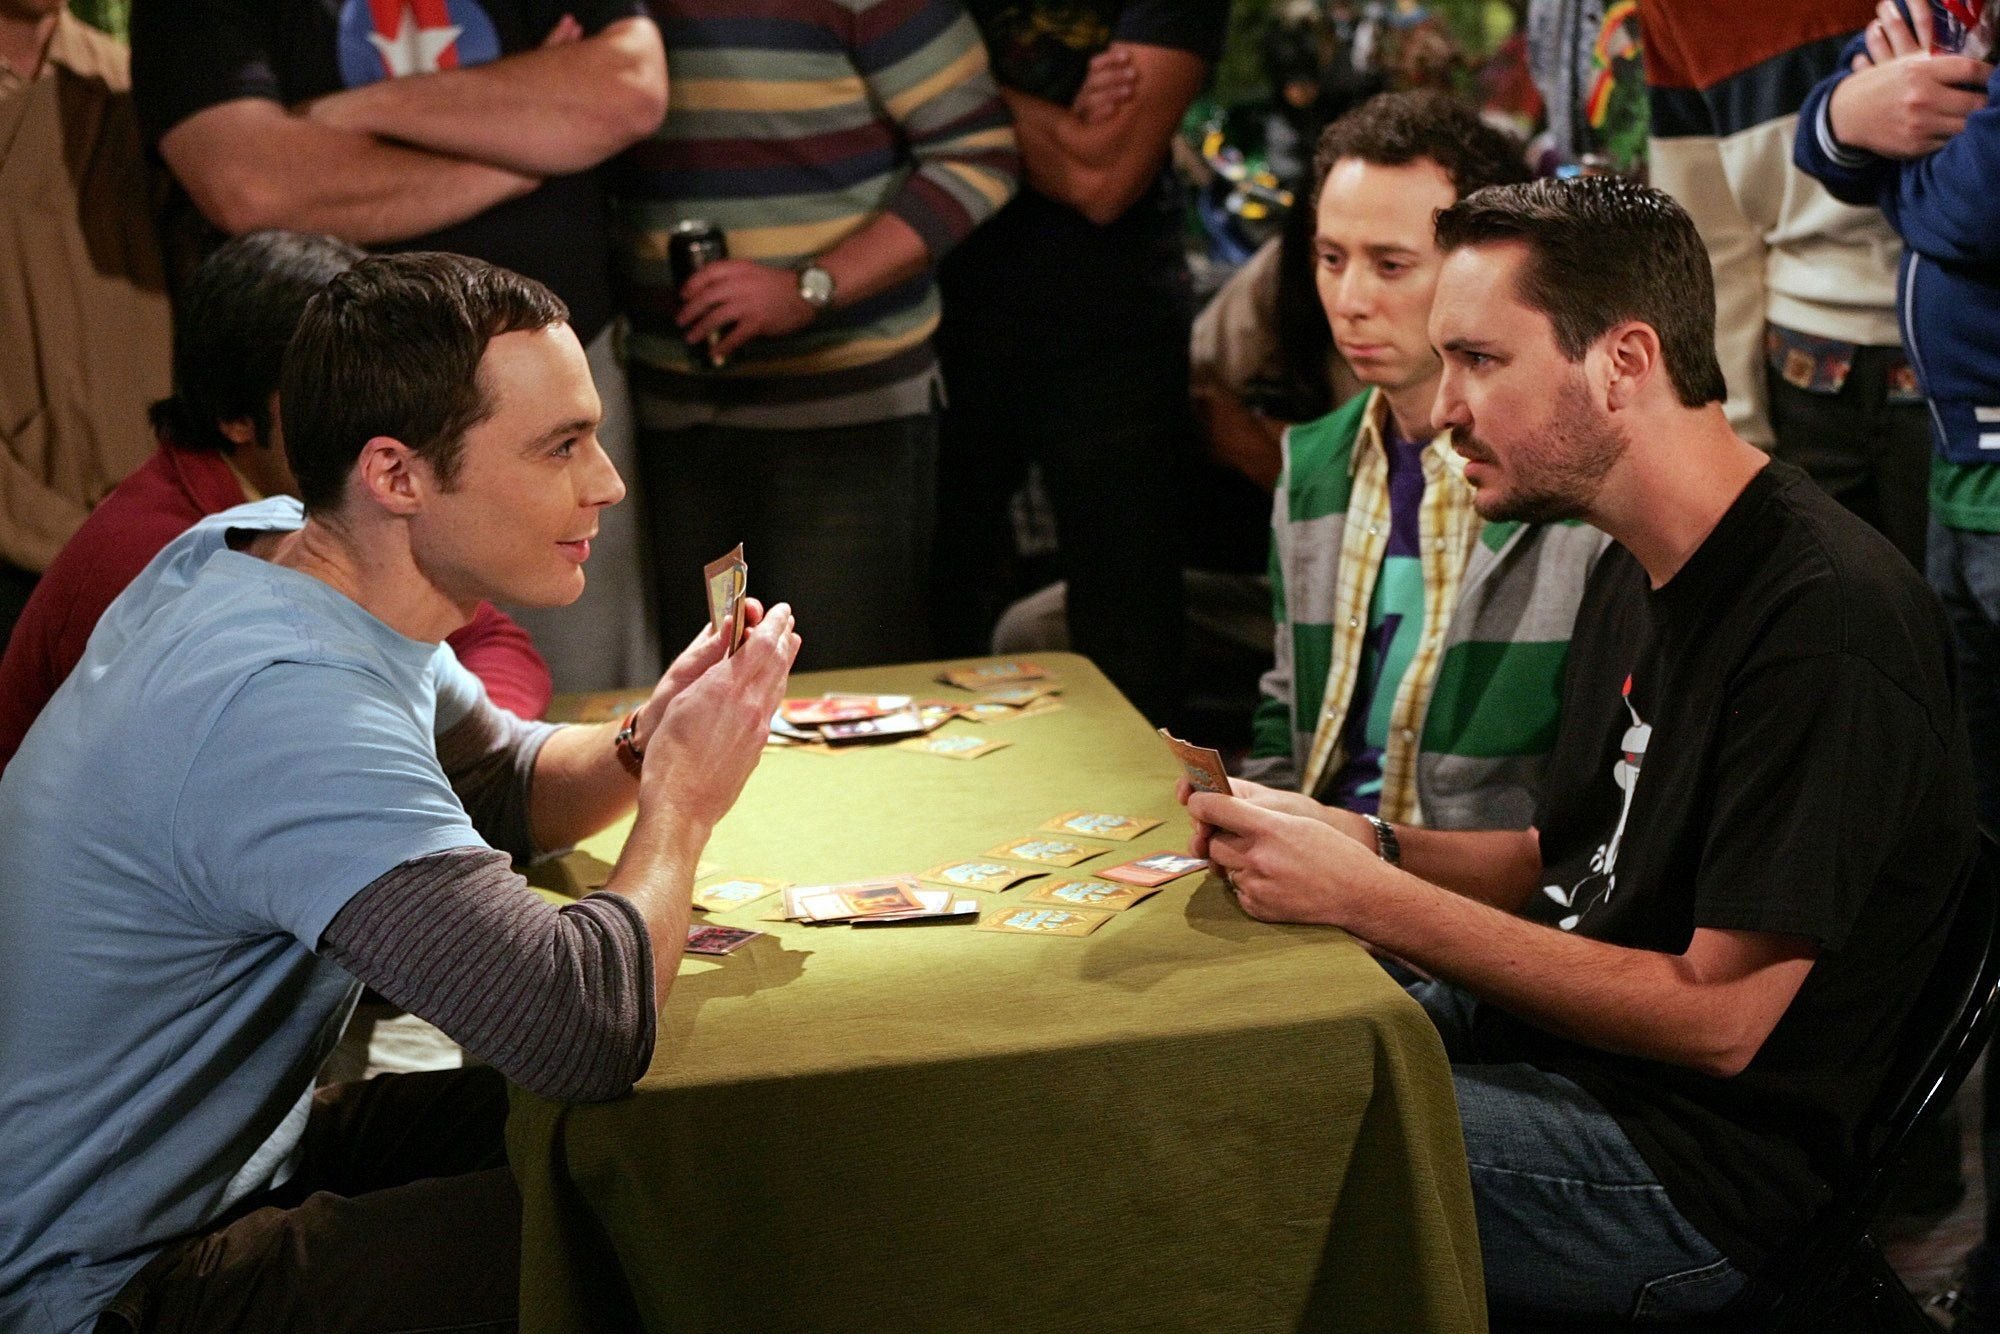 Wil Wheaton, Jim Parsons, and Kevin Sussman in 'The Big Bang Theory'